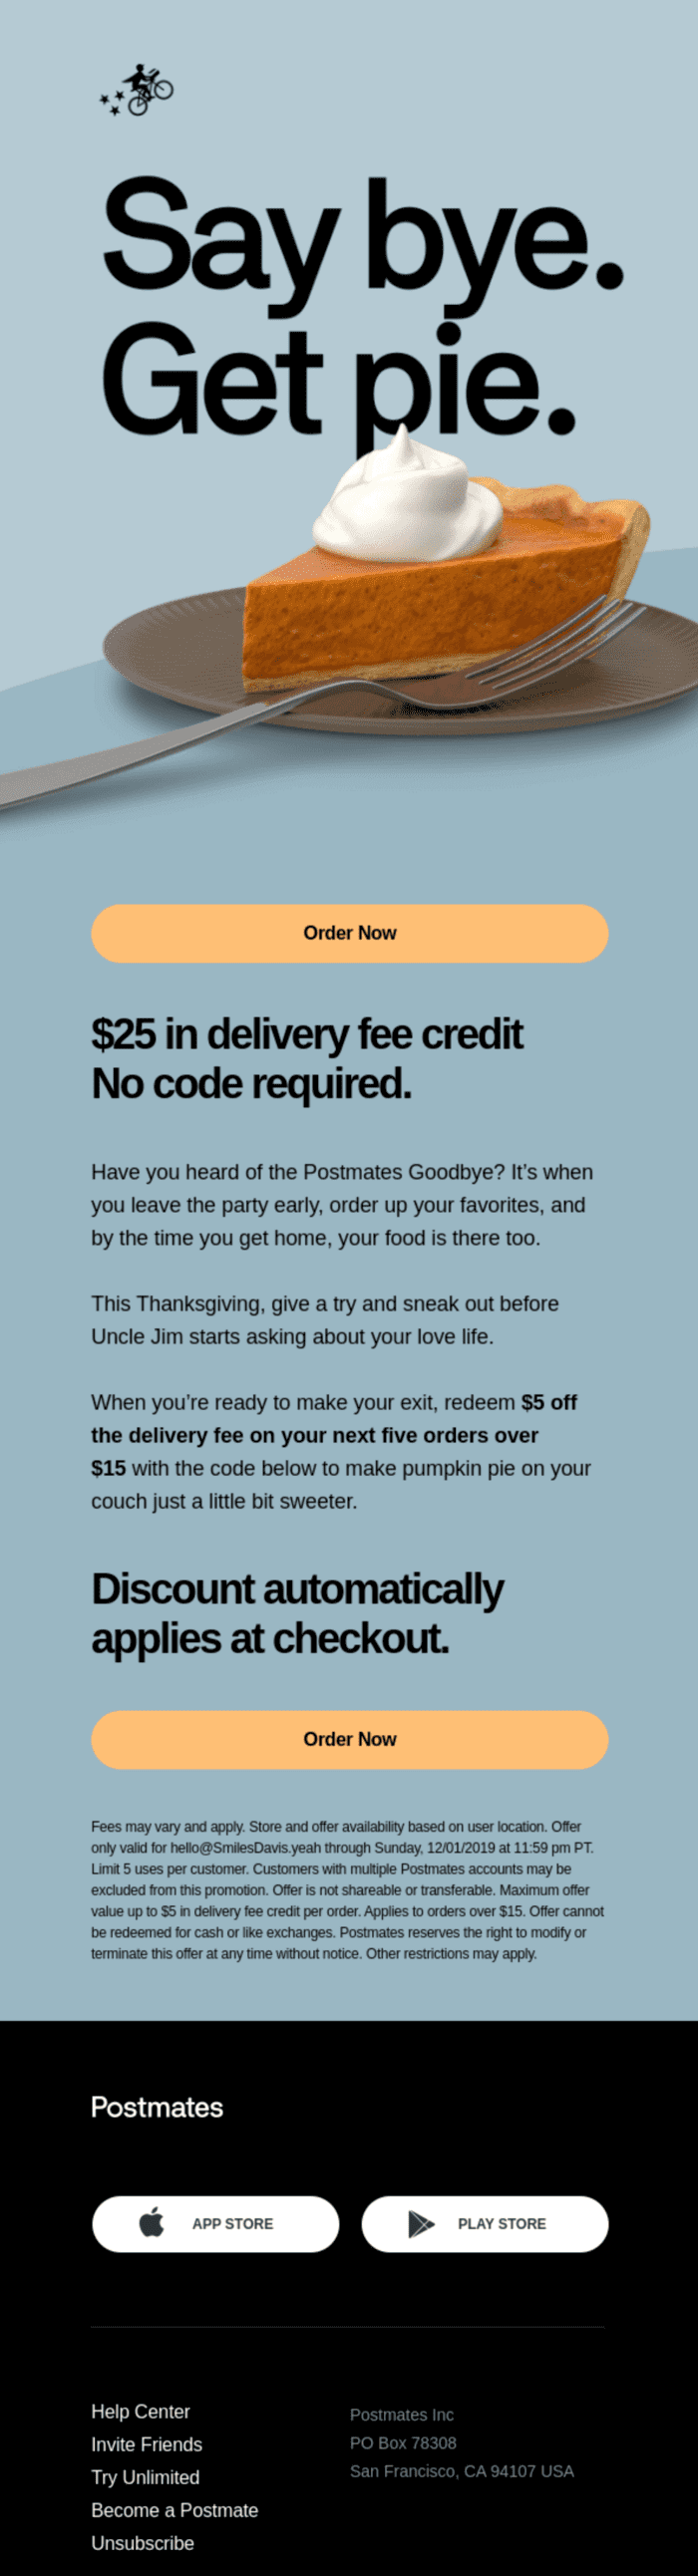 A Thanksgiving email announcing a $25 in delivery fee credit with no code